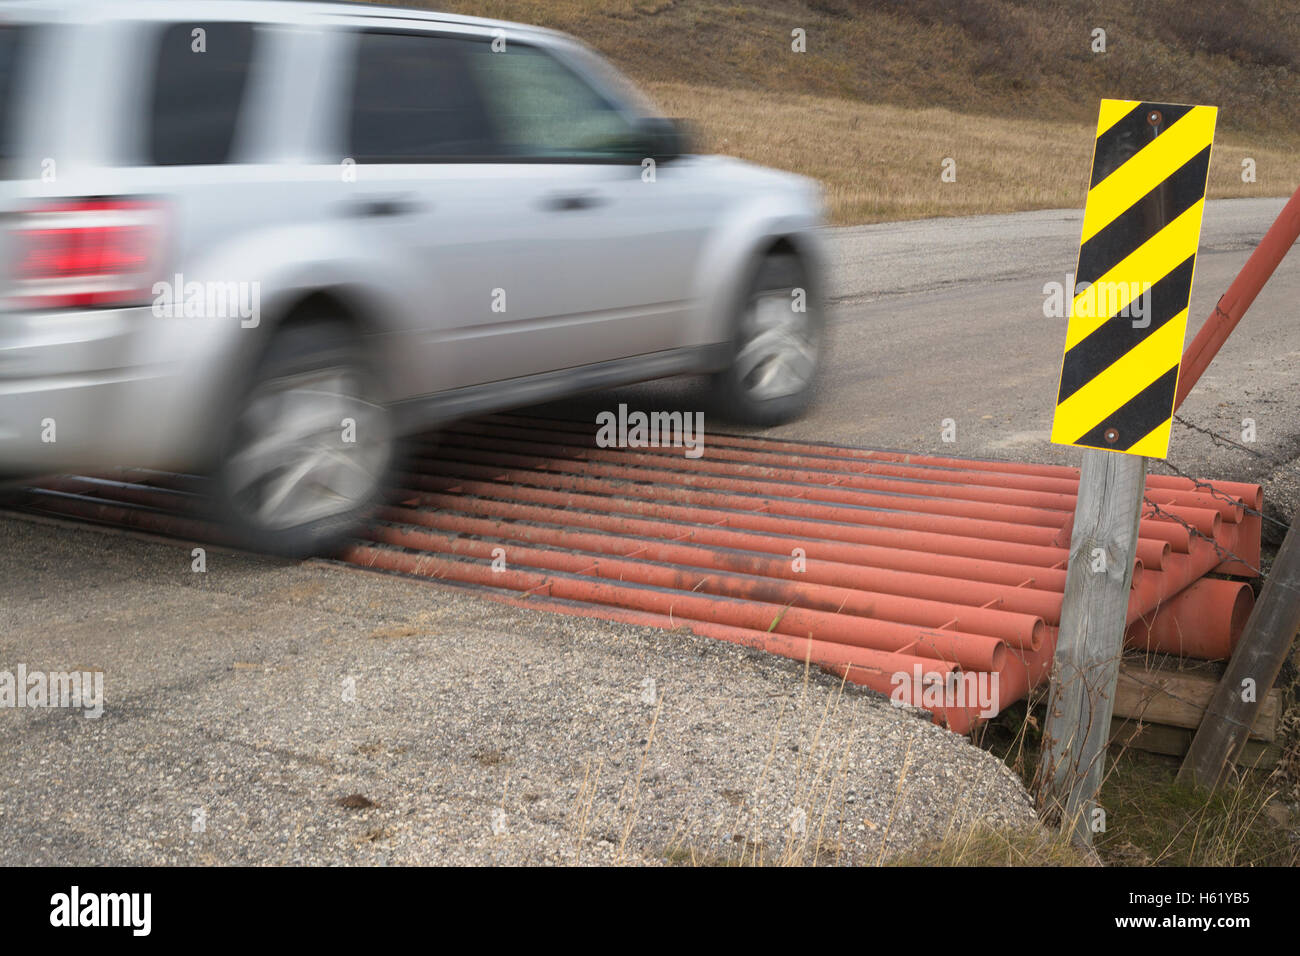 Vehicle crossing a cattle guard to control livestock movement between pastures on a rural road Stock Photo